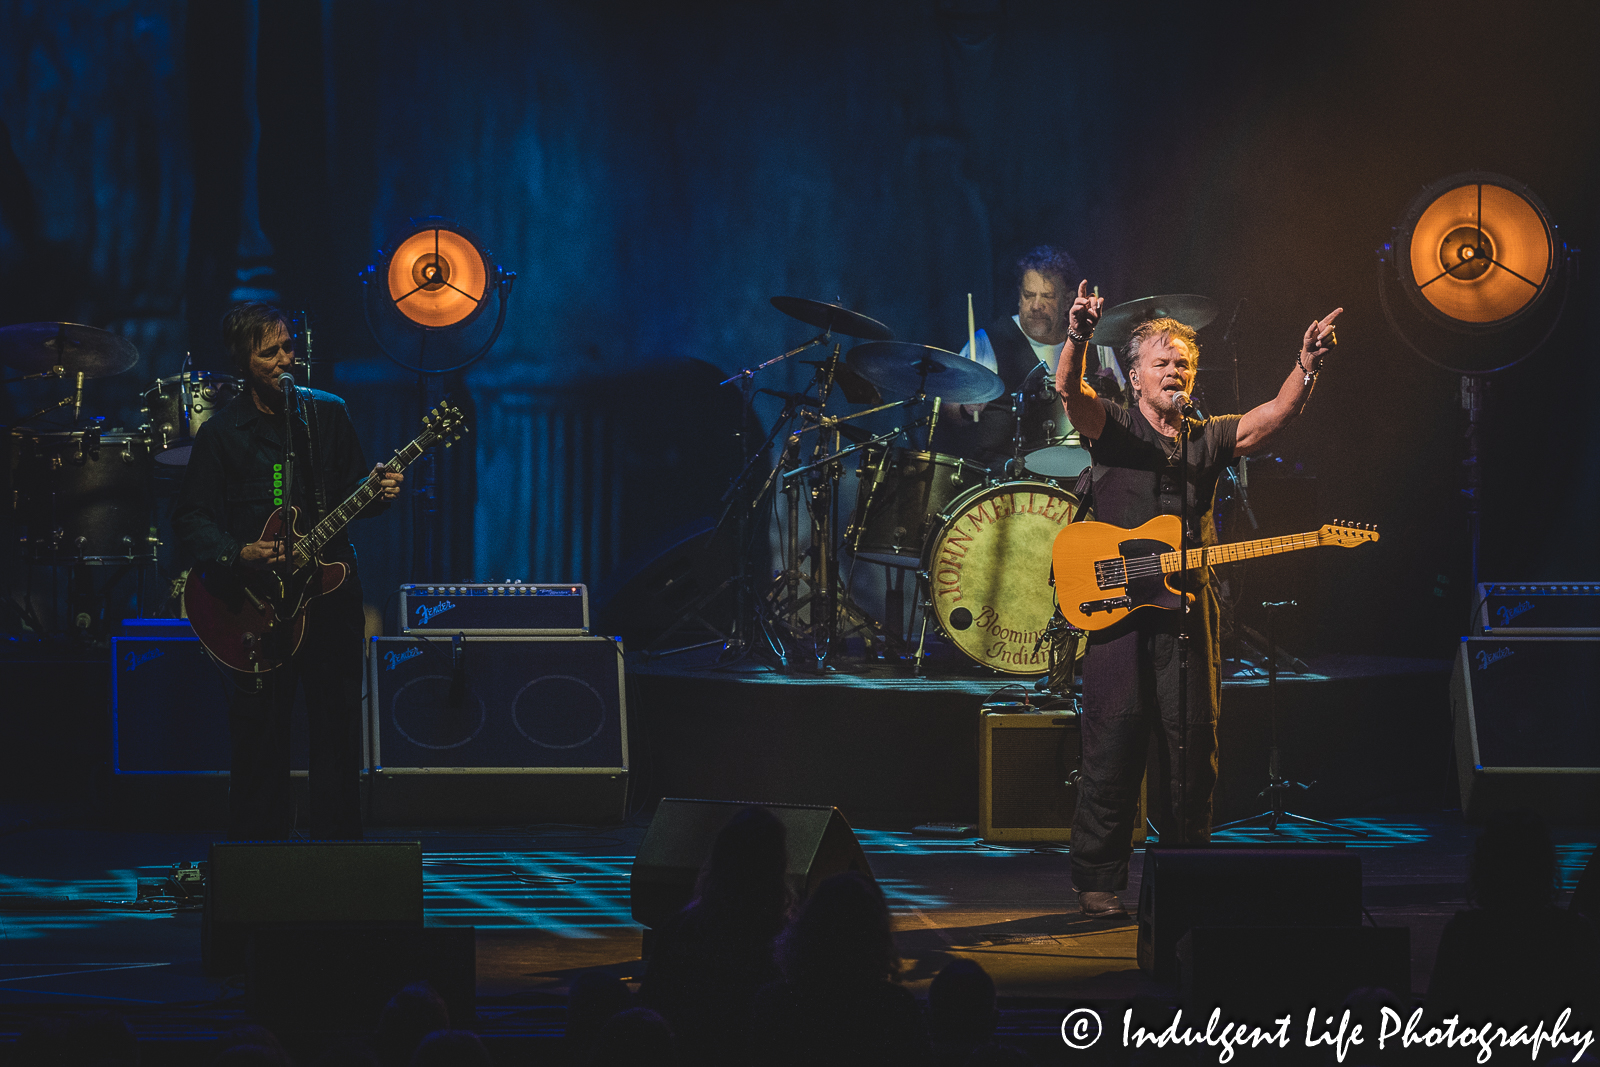 John Mellencamp singing "Minutes to Memories" with guitarist Andy York and drummer Dane Clark at The Midland Theatre in downtown Kansas City, MO on April 4, 2023.